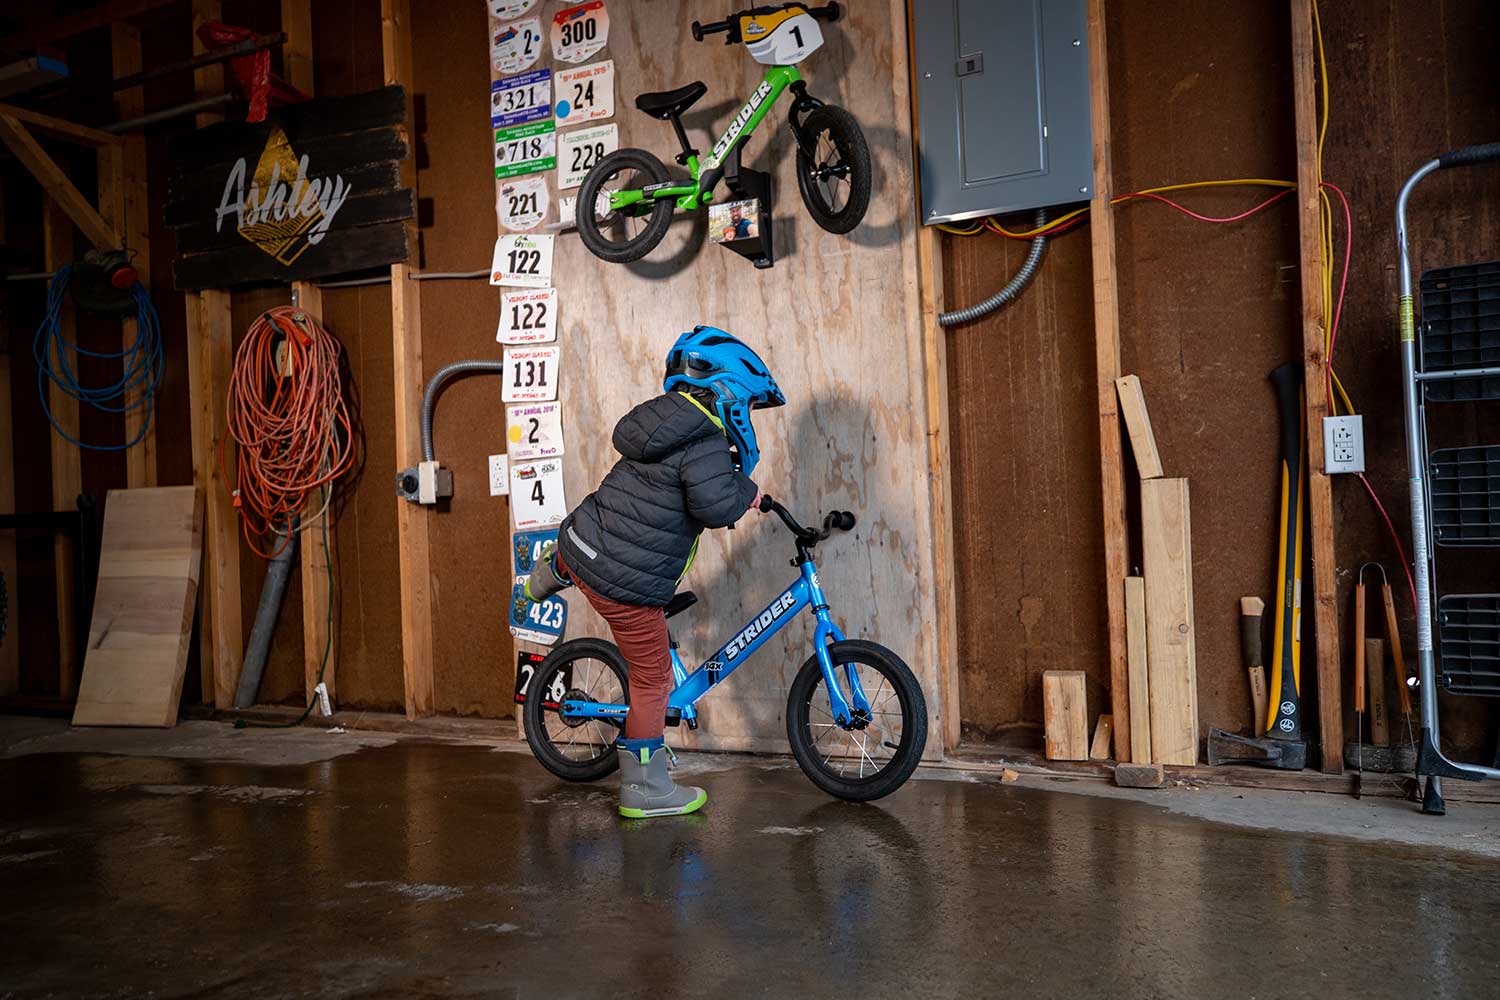 A child in a garage gets on a bike with a Memory Mount installed above